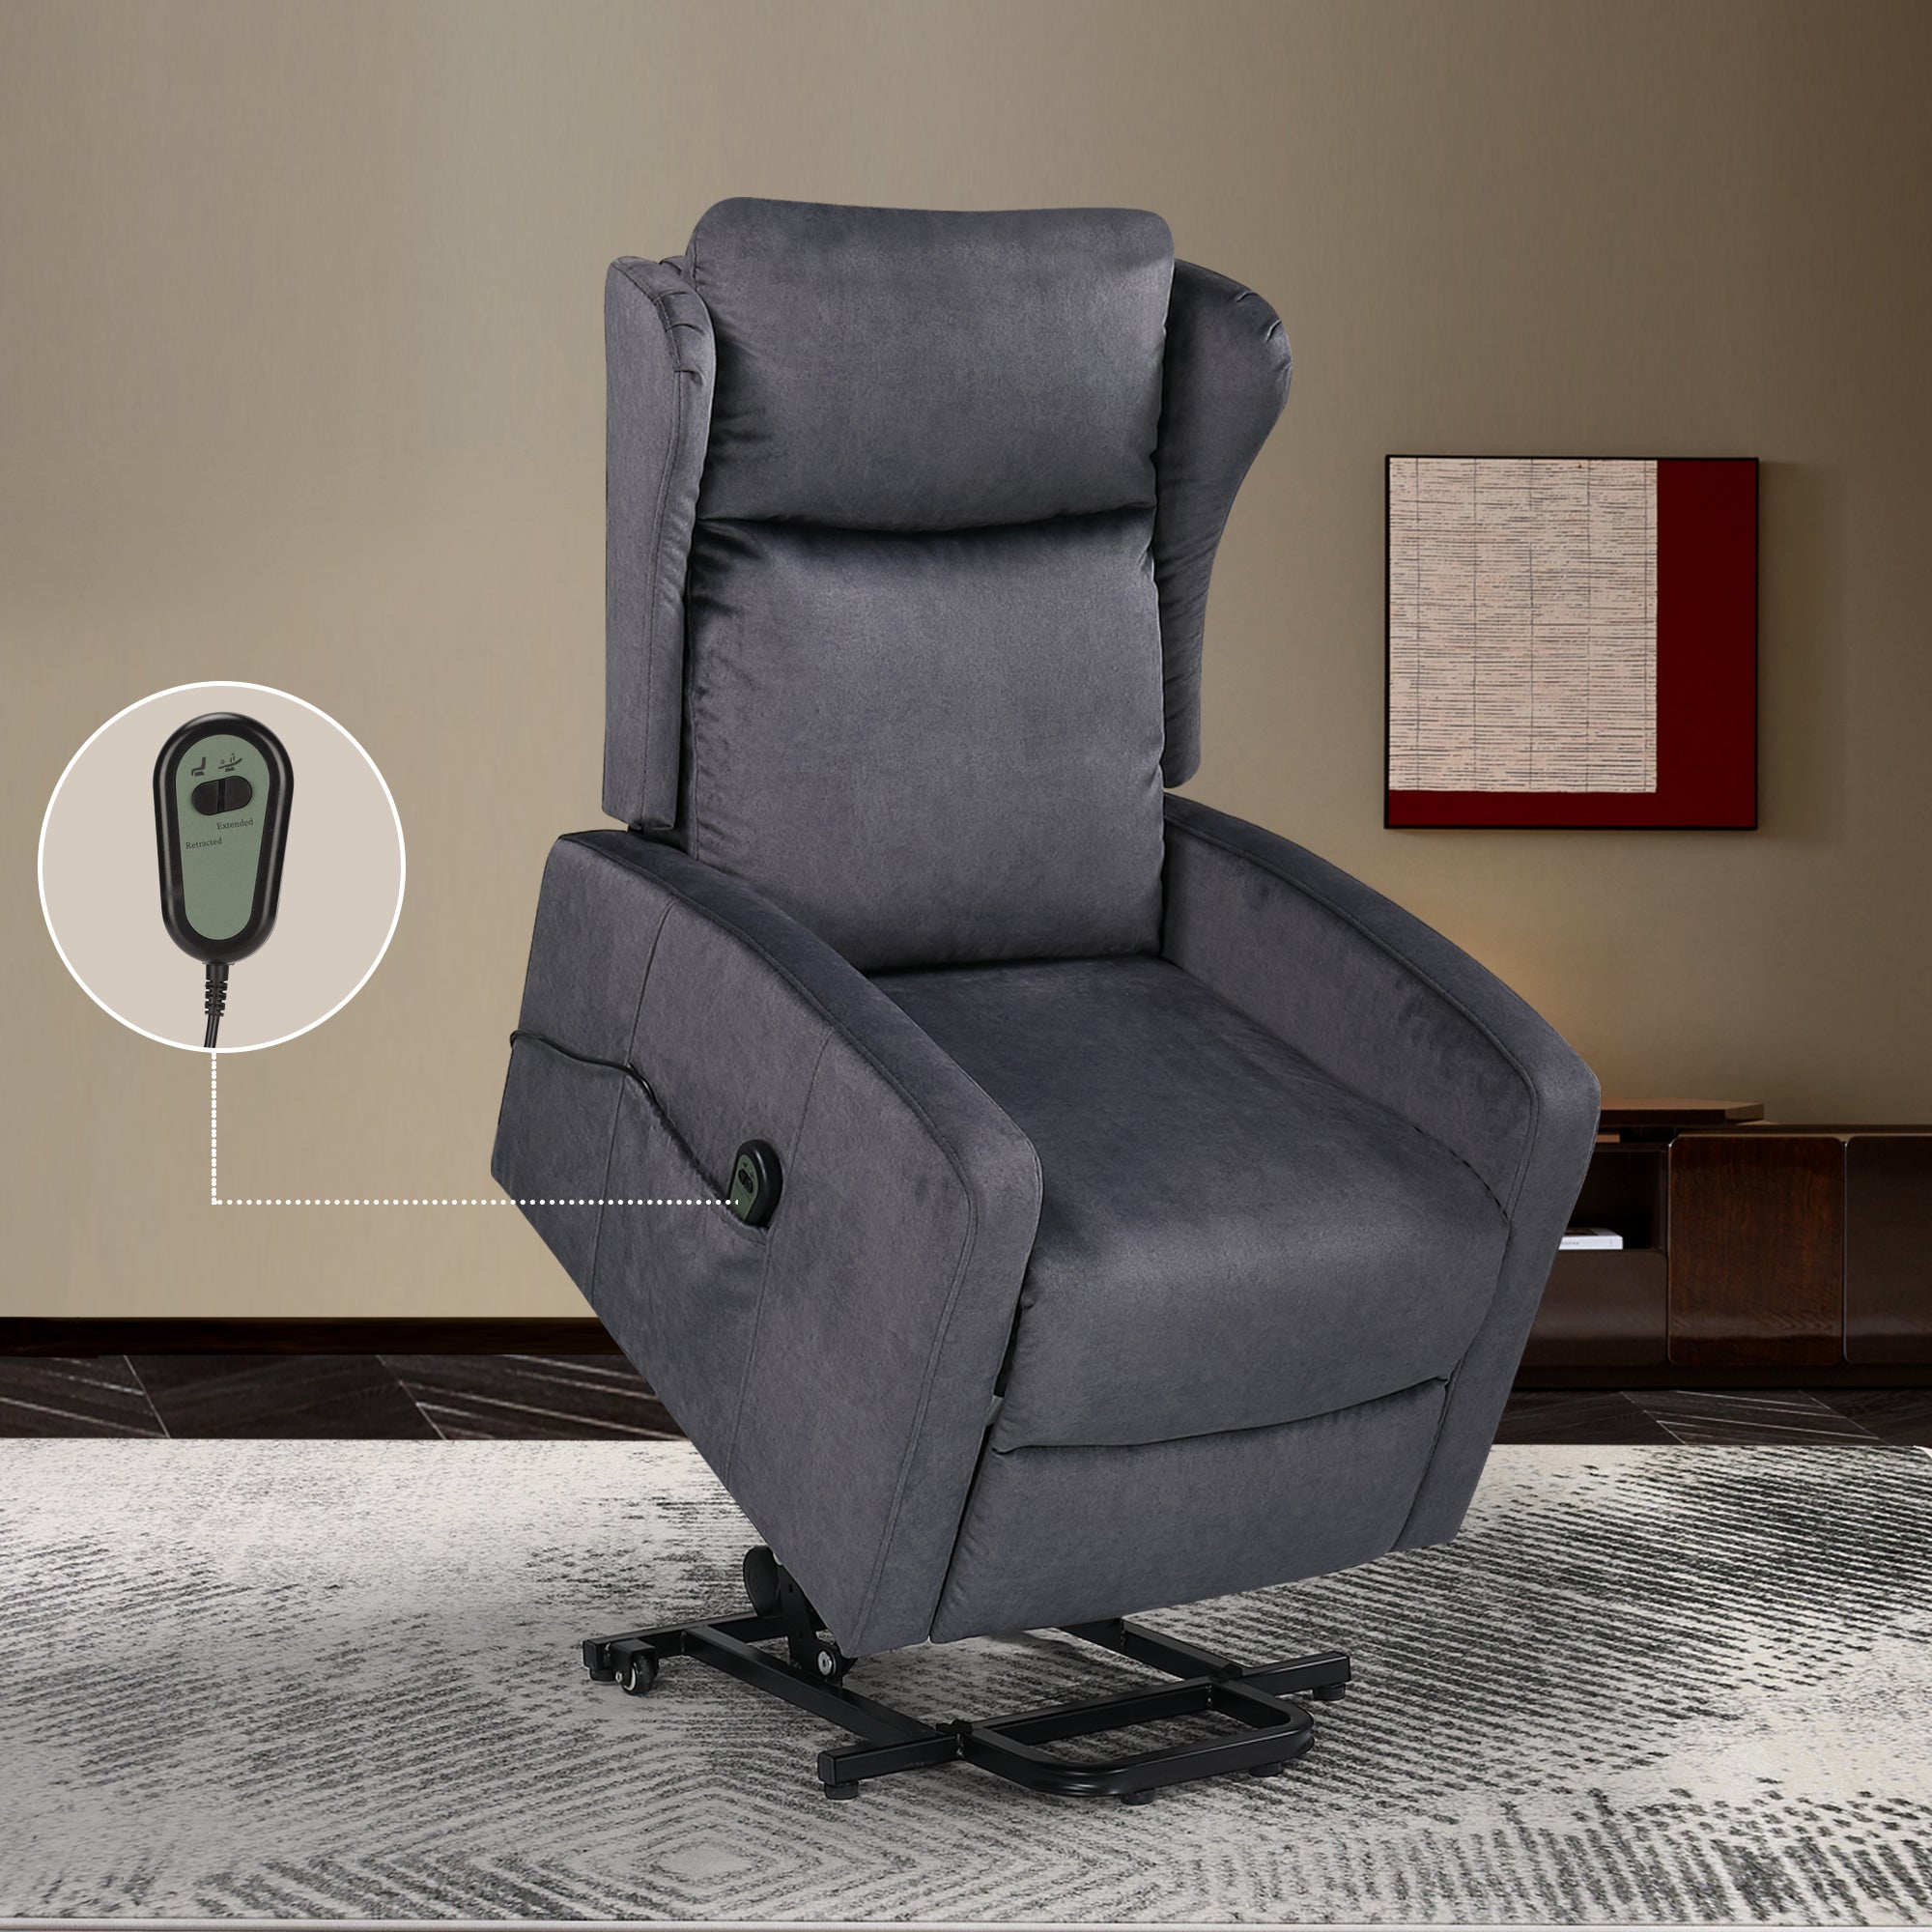 JST Power Lift Recliner Chair, simple remote lift